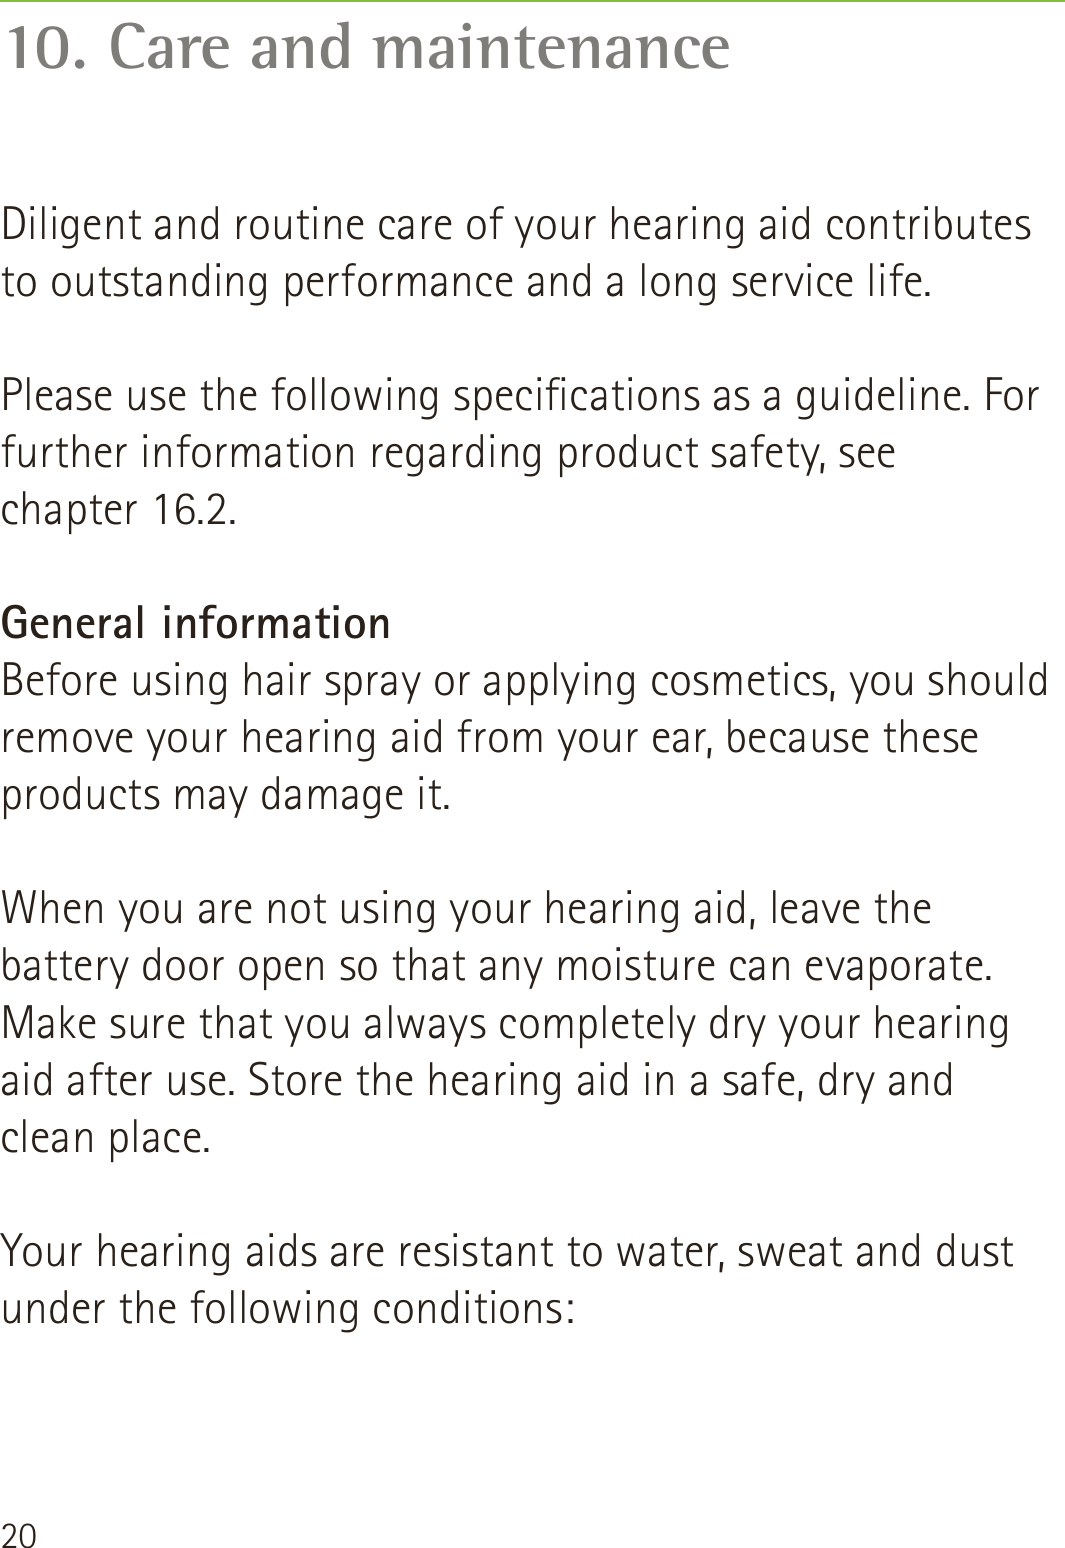 2010. Care and maintenanceDiligent and routine care of your hearing aid contributes to outstanding performance and a long service life.   Please use the following specications as a guideline. For further information regarding product safety, see  chapter 16.2.General informationBefore using hair spray or applying cosmetics, you should remove your hearing aid from your ear, because these products may damage it.When you are not using your hearing aid, leave the battery door open so that any moisture can evaporate. Make sure that you always completely dry your hearing aid after use. Store the hearing aid in a safe, dry and  clean place.Your hearing aids are resistant to water, sweat and dust under the following conditions: